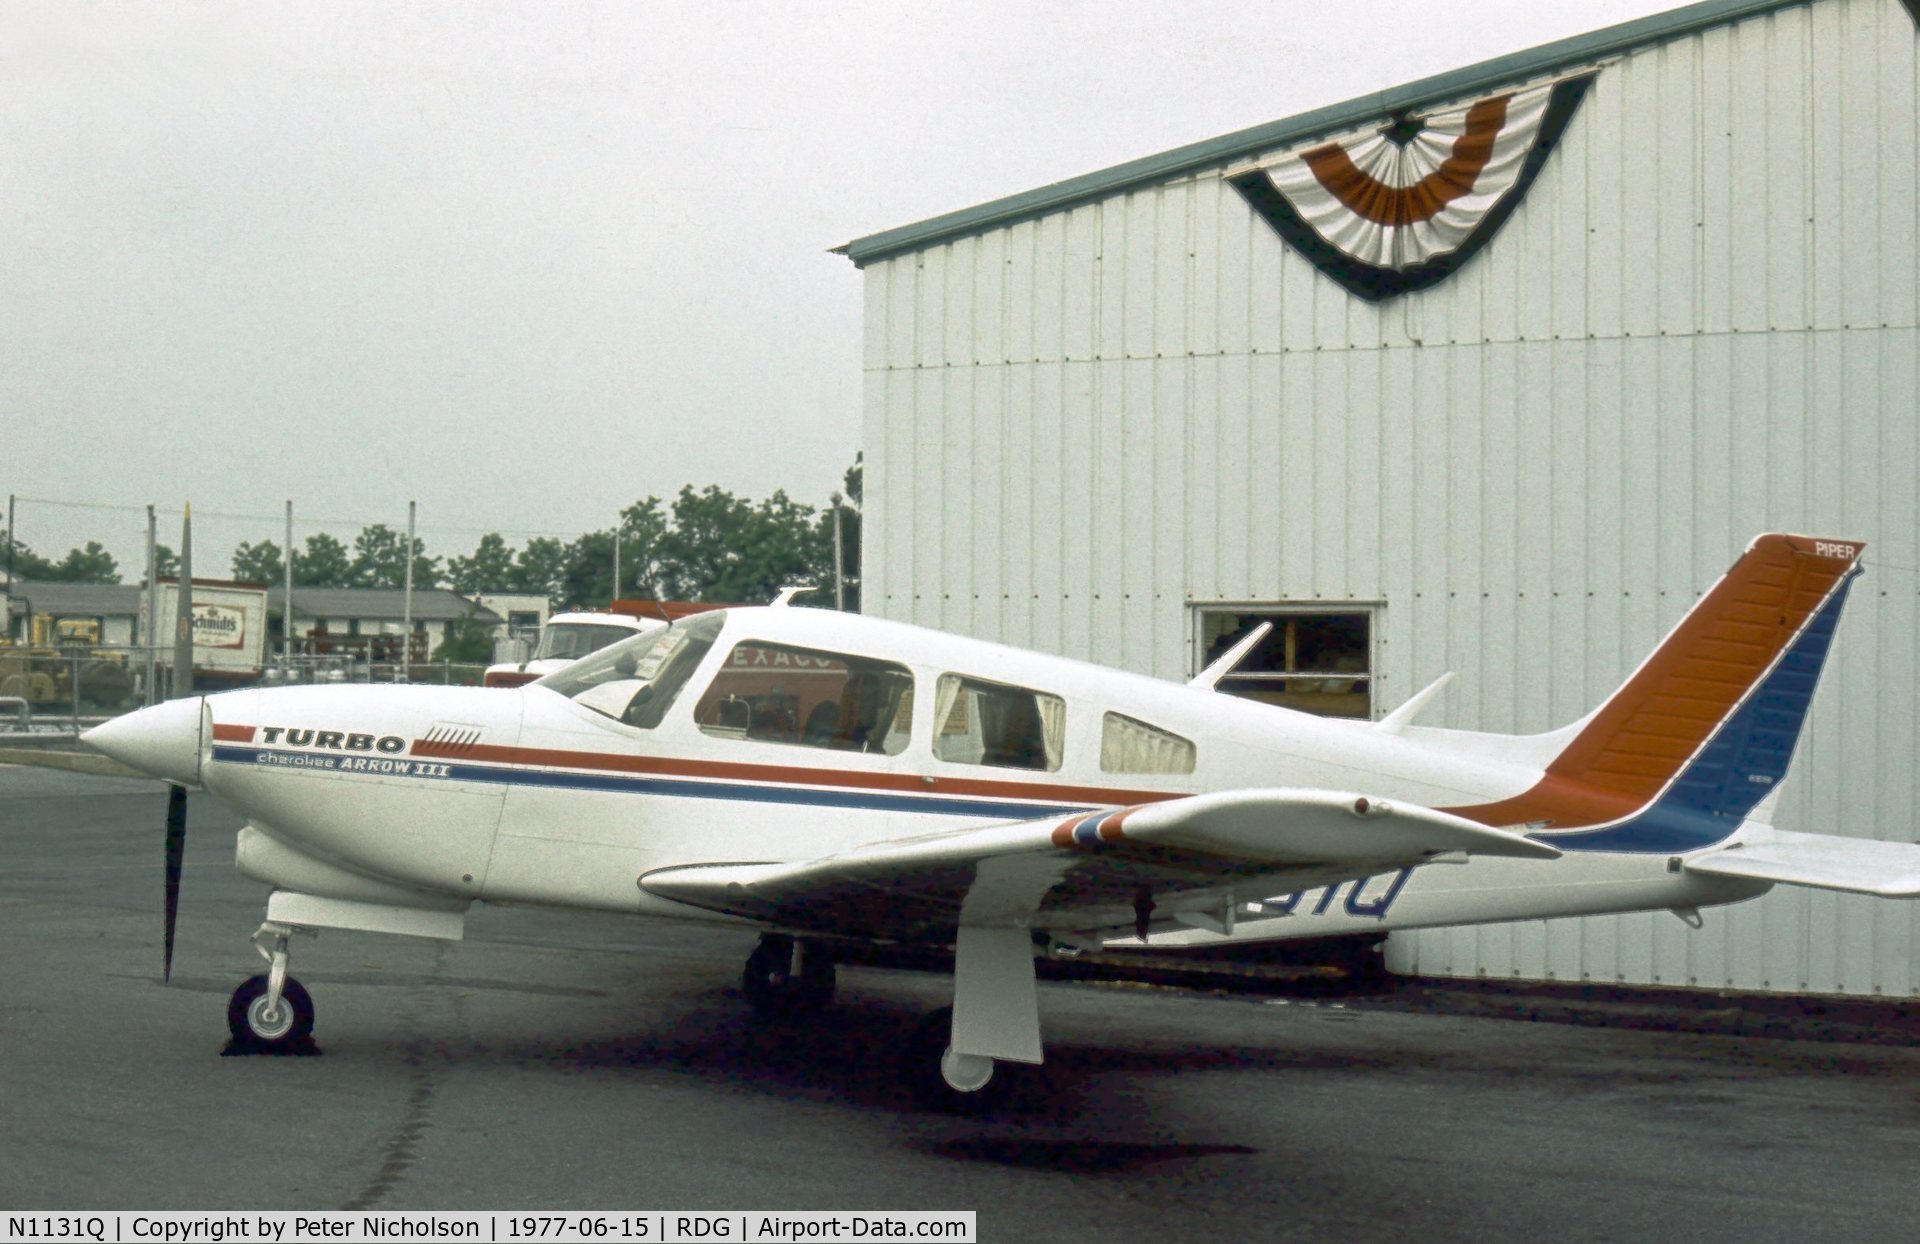 N1131Q, 1977 Piper PA-28R-201T Cherokee Arrow III C/N 28R-7703053, This Turbo Cherokee Arrow III was displayed at the 1977 Reading Airshow.